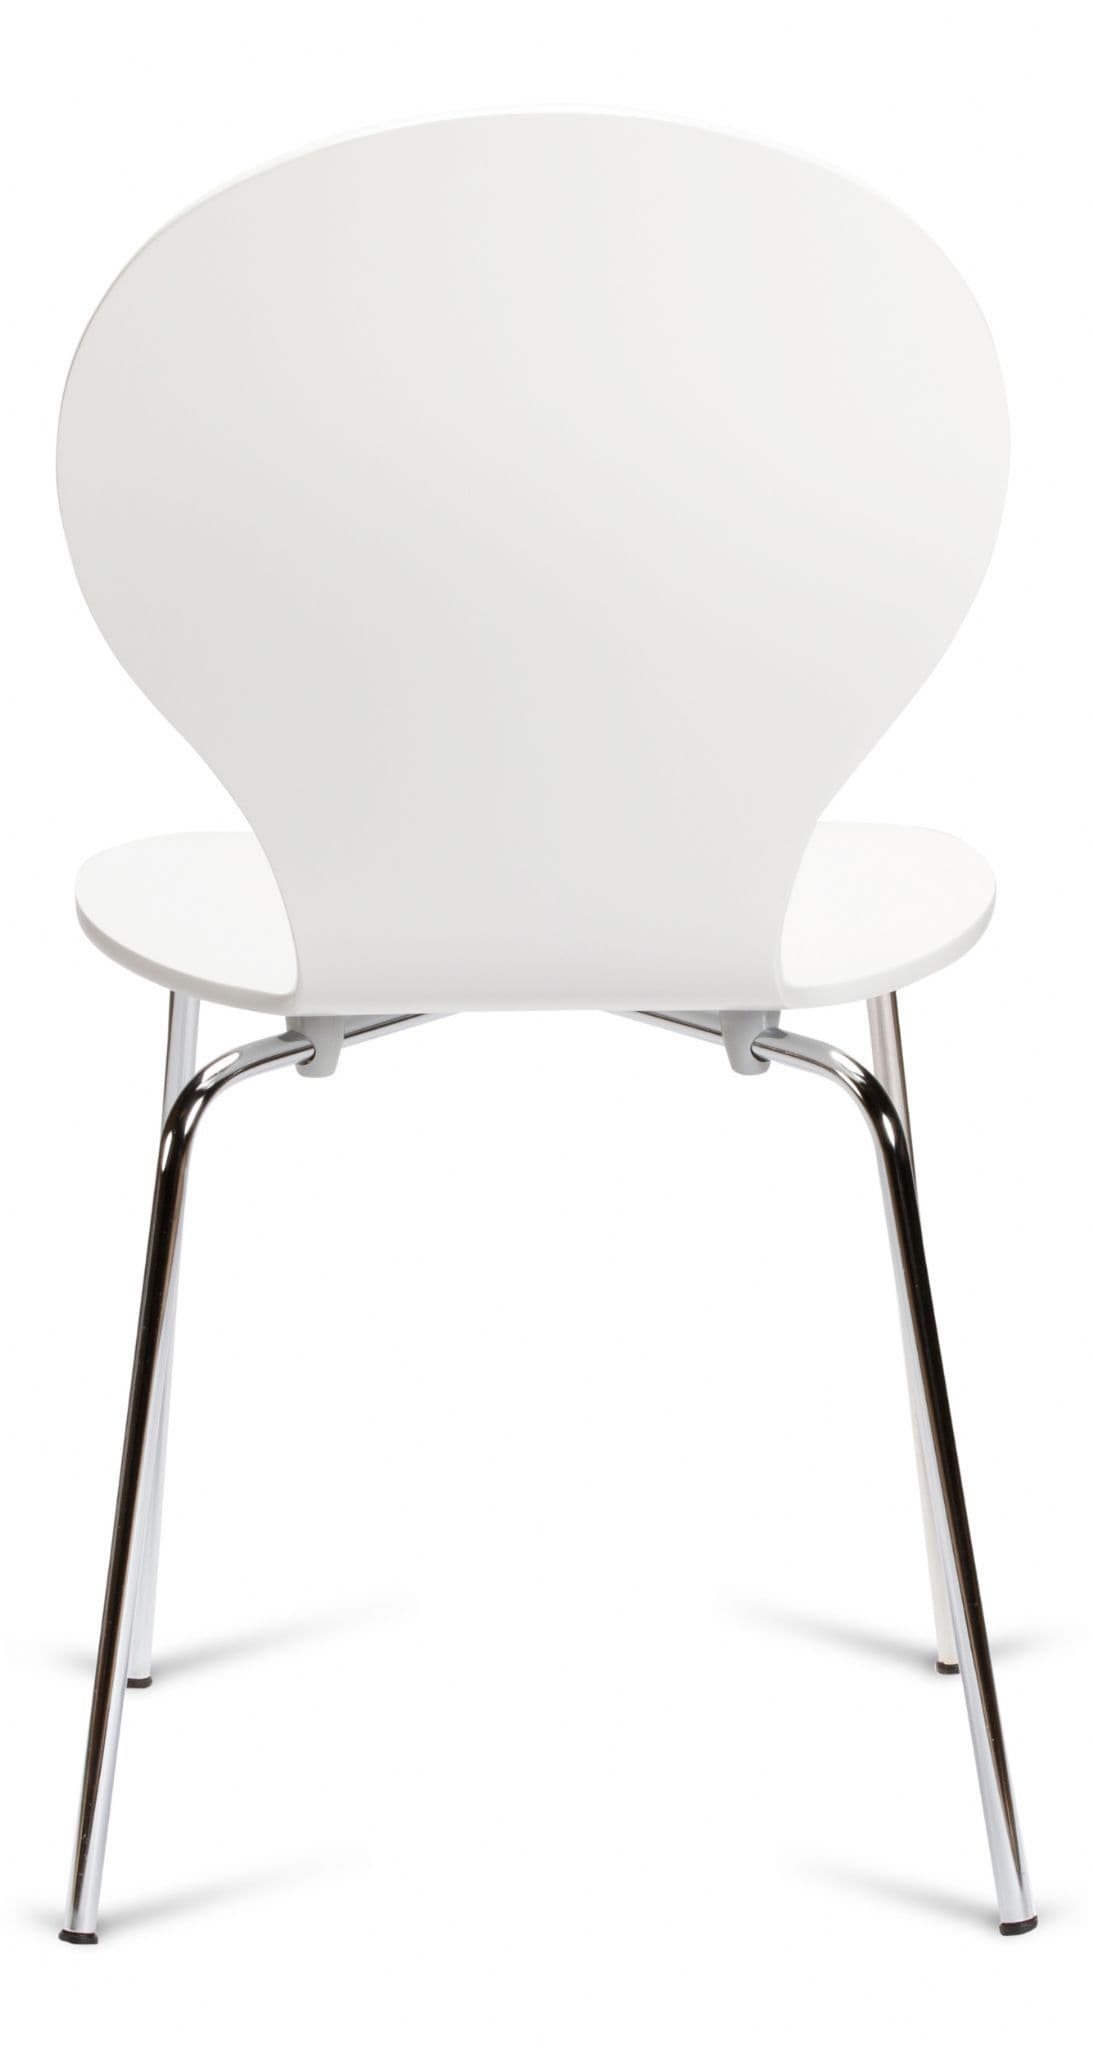 Kimberley White & Chrome Dining Chairs Rear View